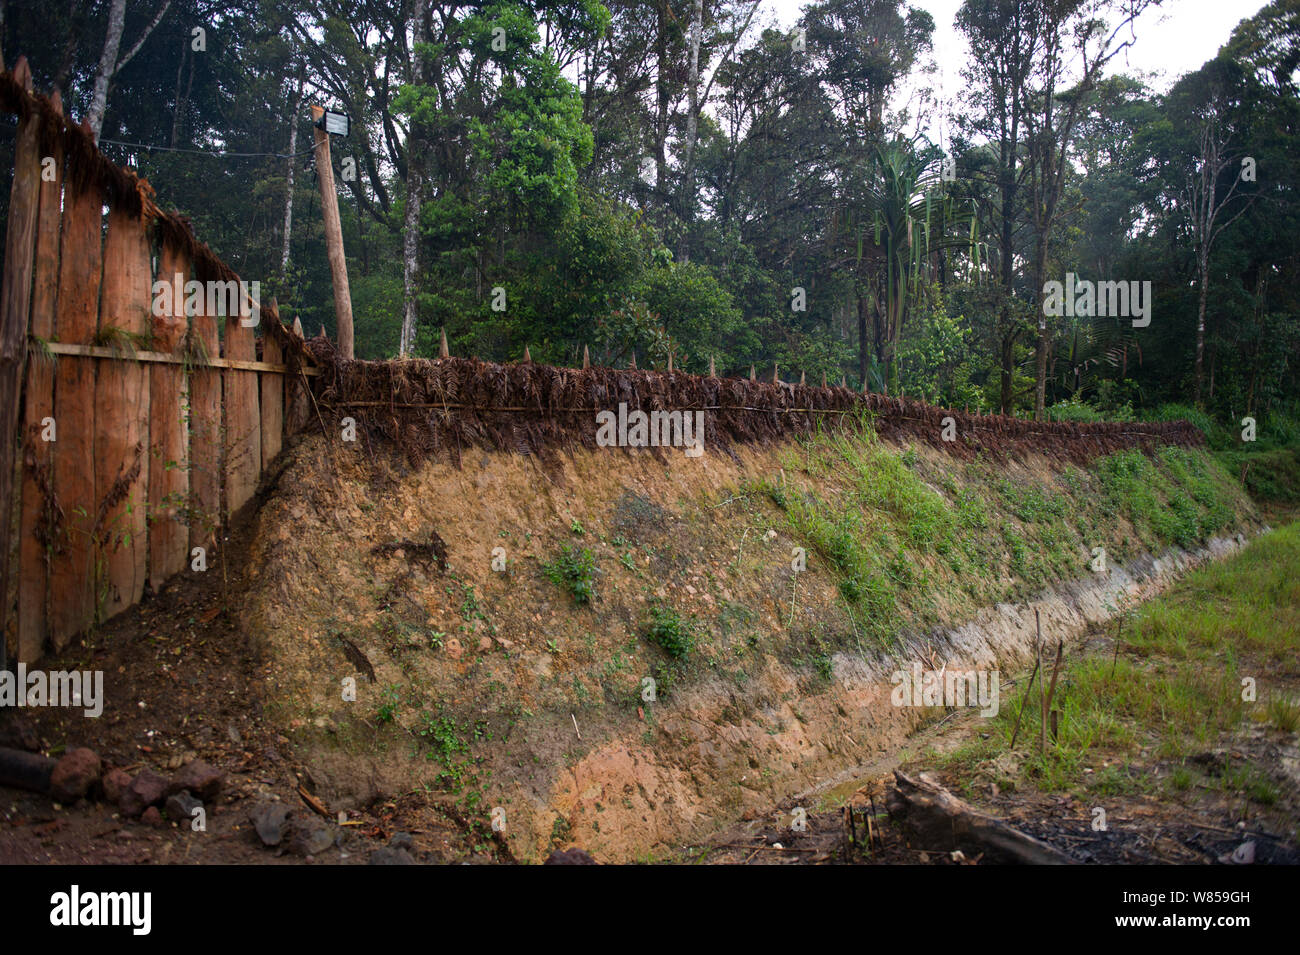 Fortification, moat and stakes around habitation in Tari Valley, Southern Highlands, Papua New Guinea Stock Photo